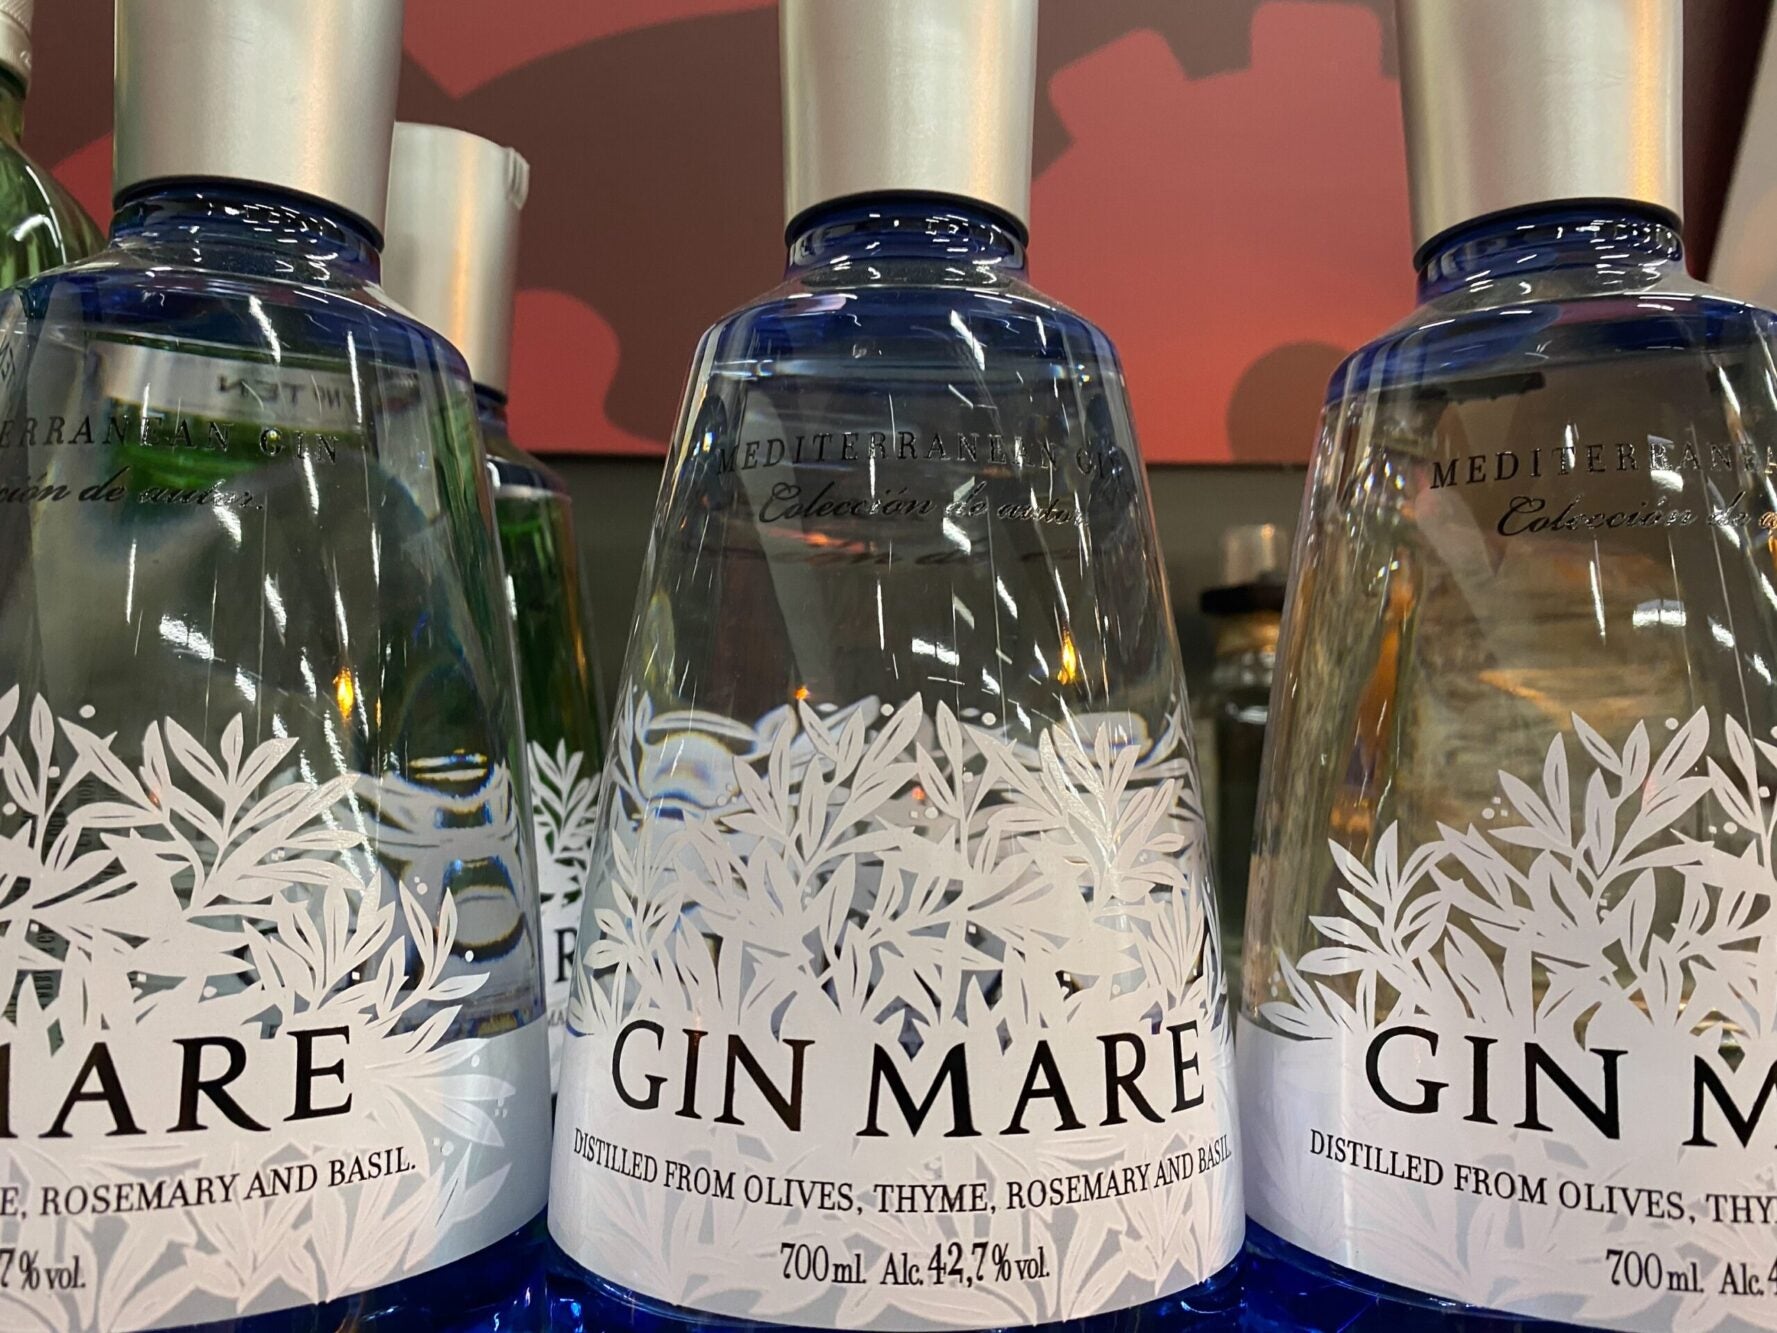 Brown-Forman reaches for gin brand Gin Mare - Just Drinks